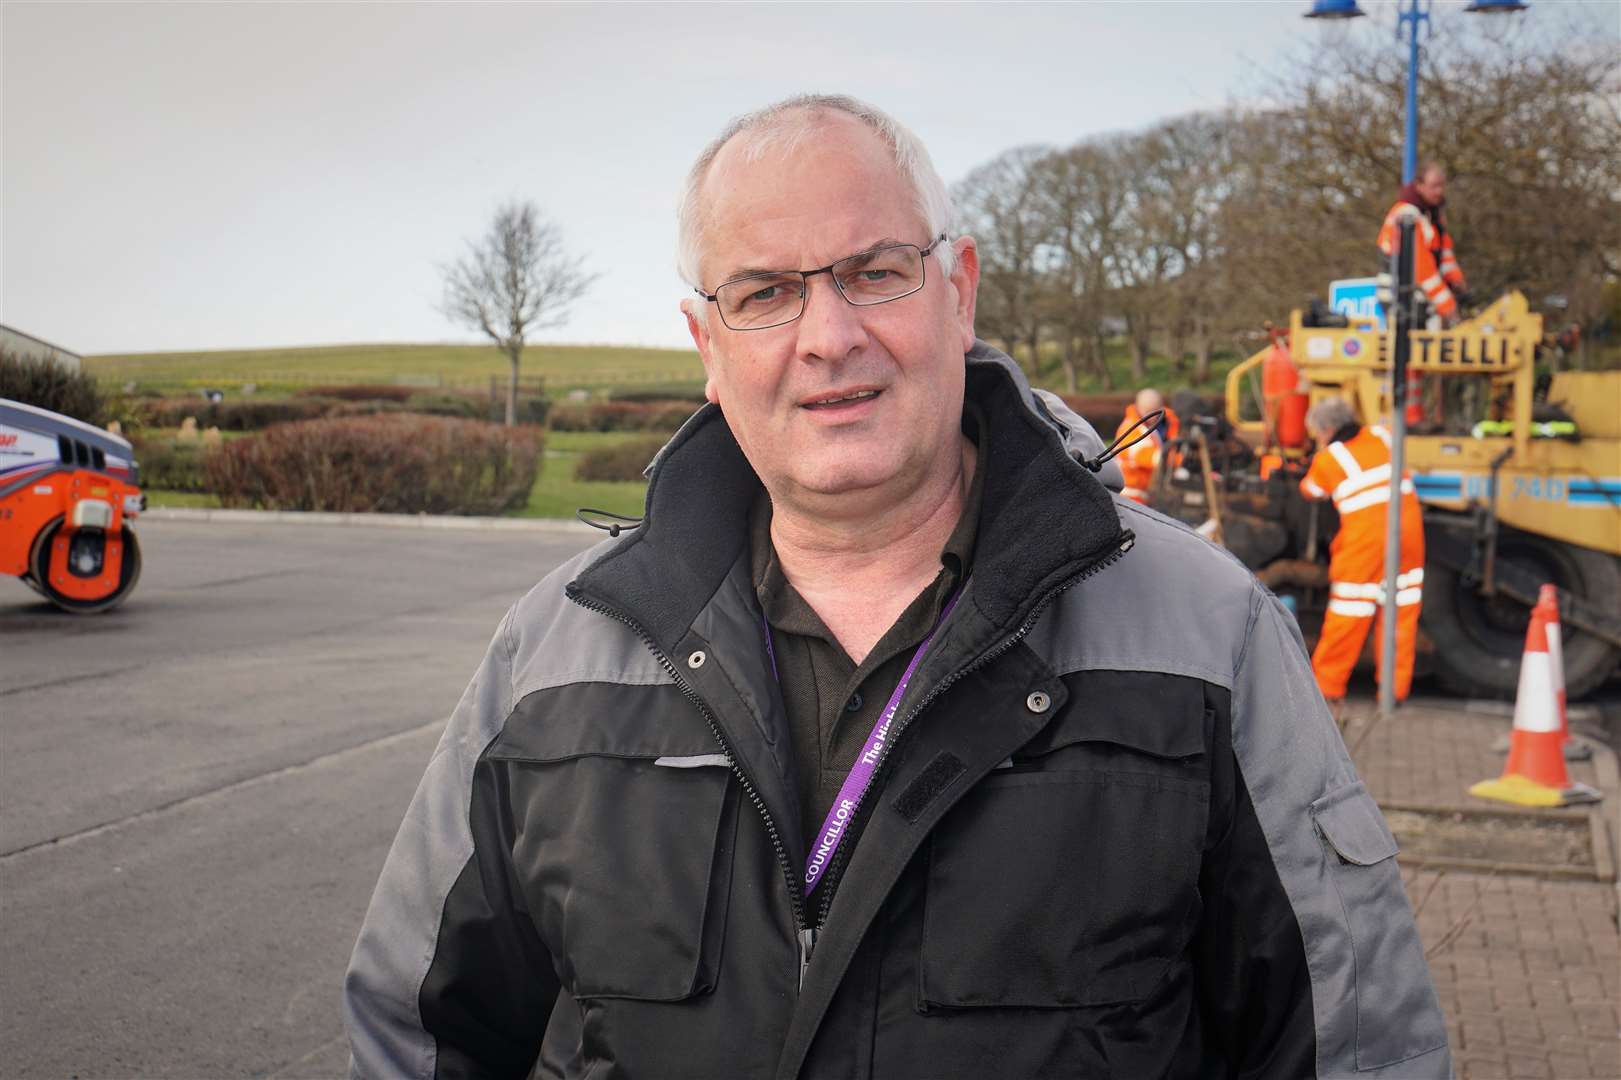 Councillor Raymond Bremner is delighted with the new asphalt surface just laid down. Pictures: DGS